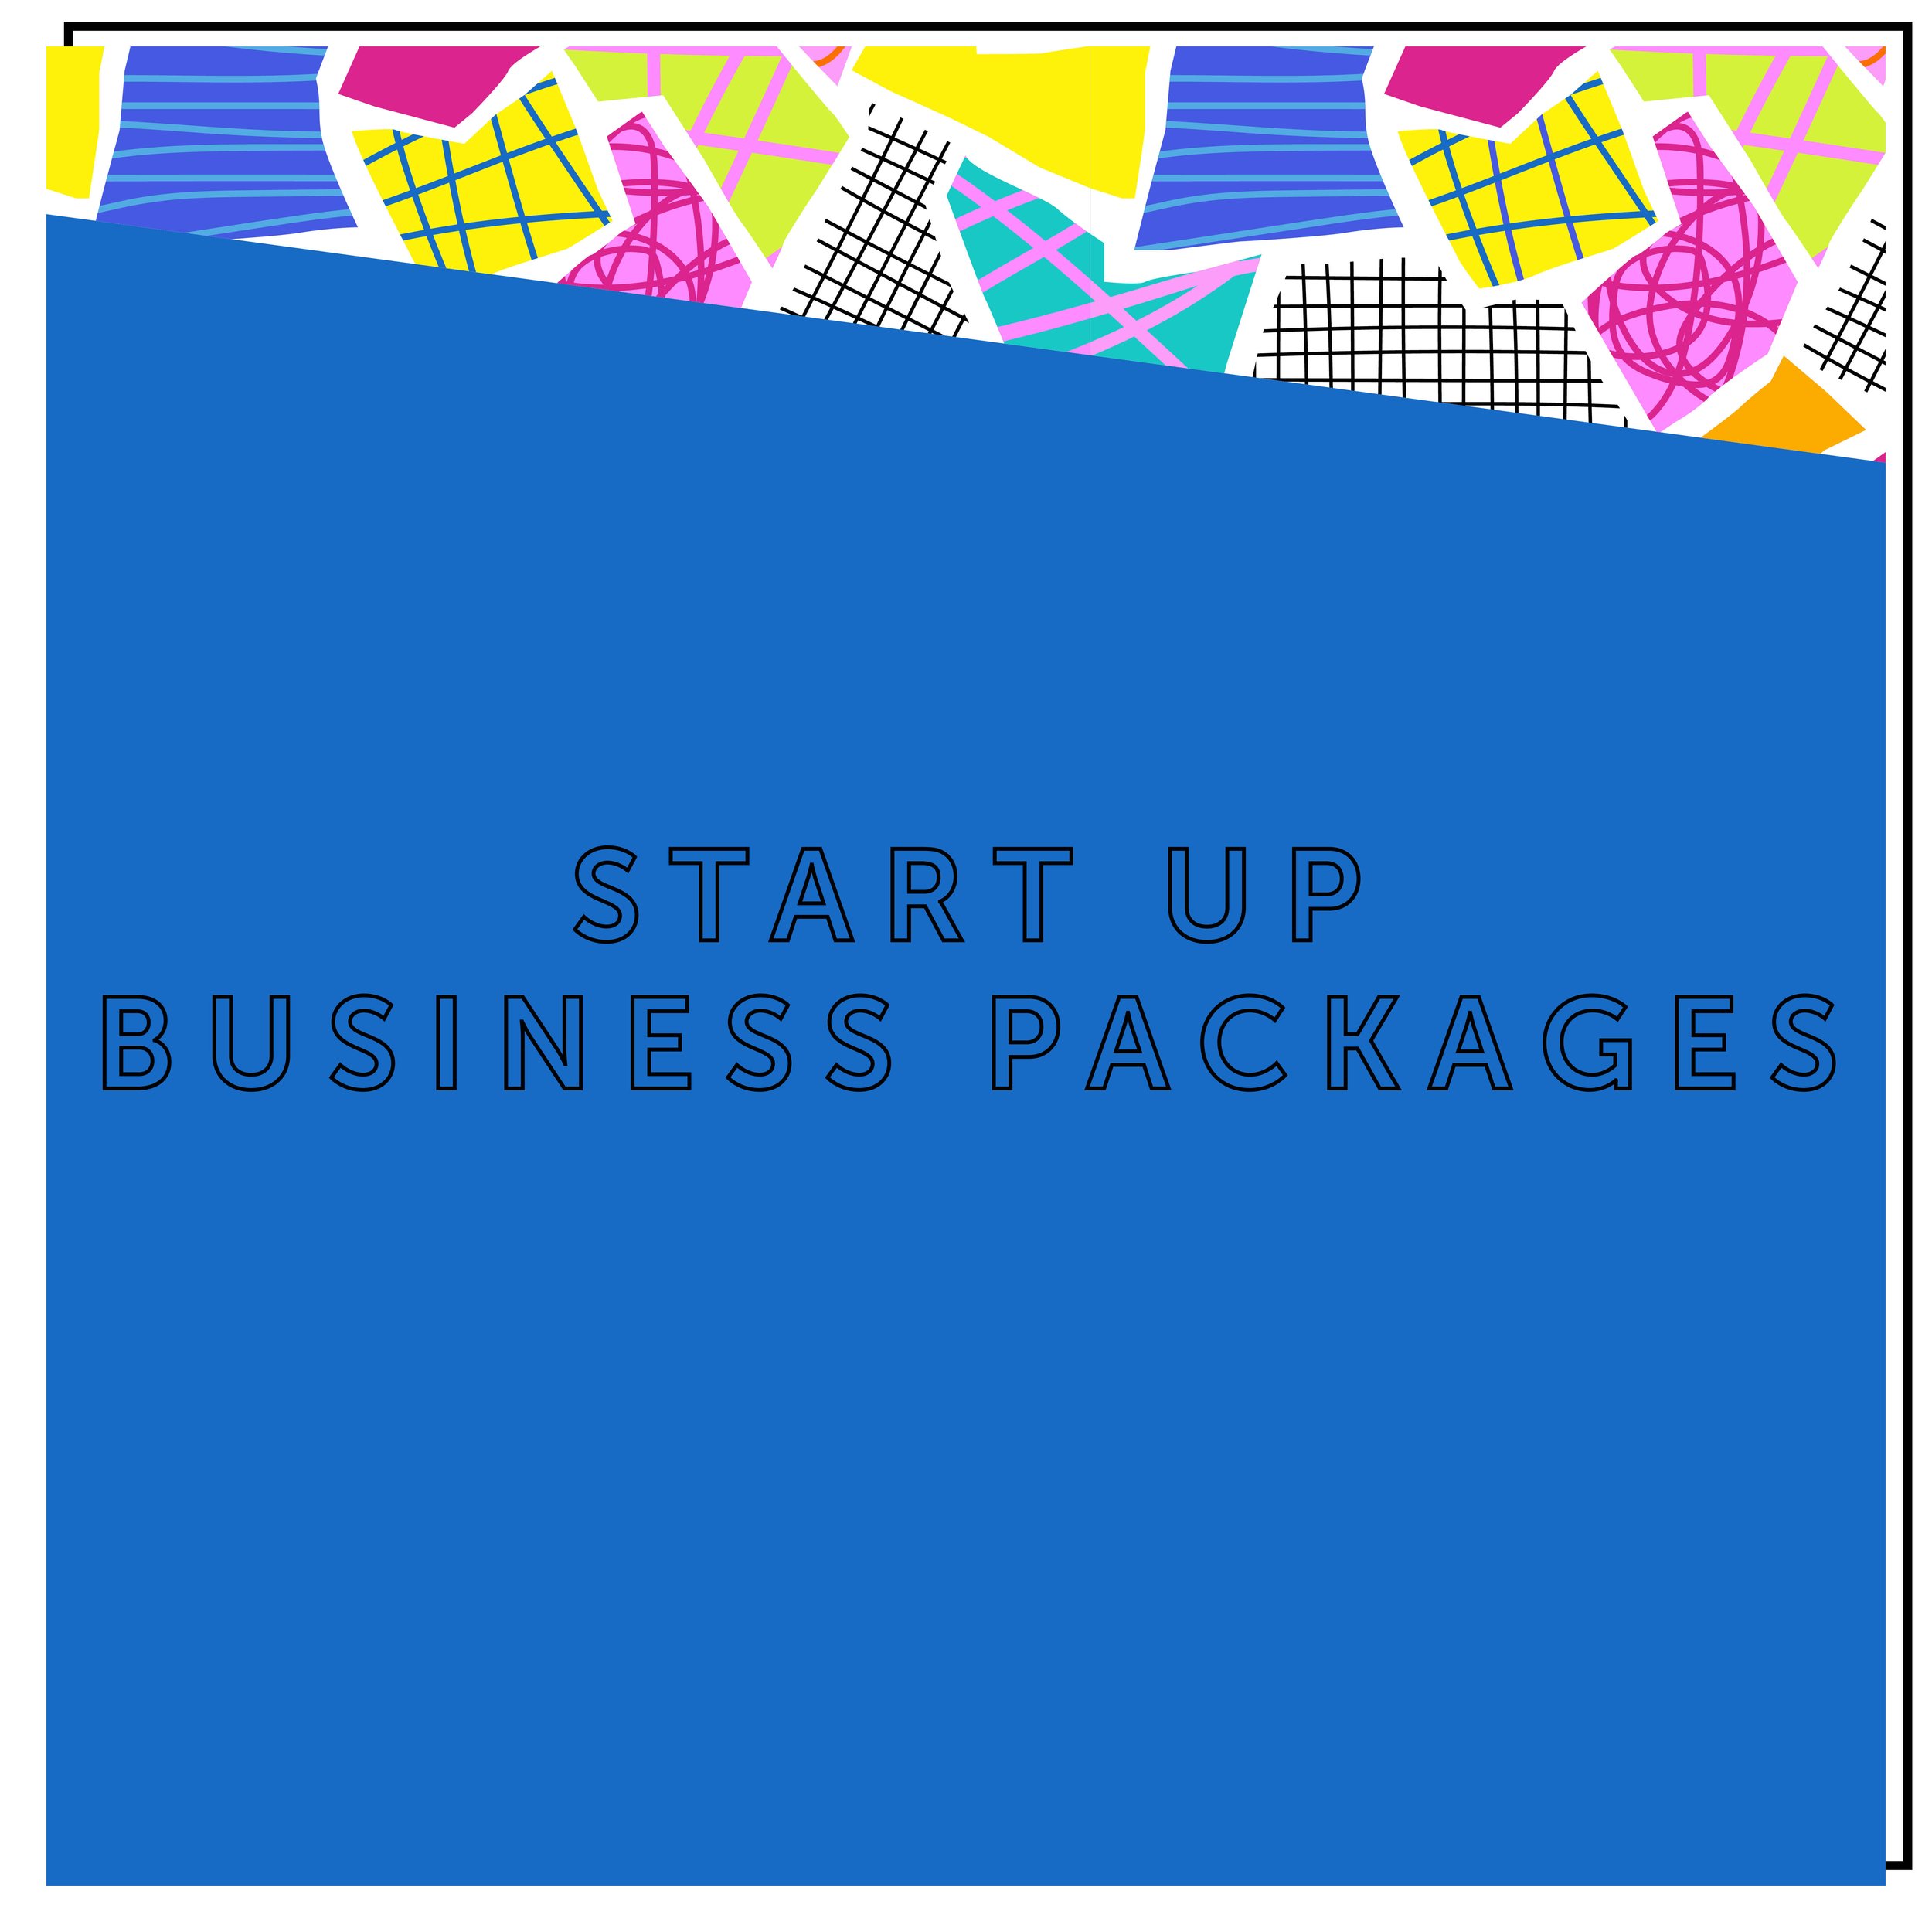 Start Up business packages